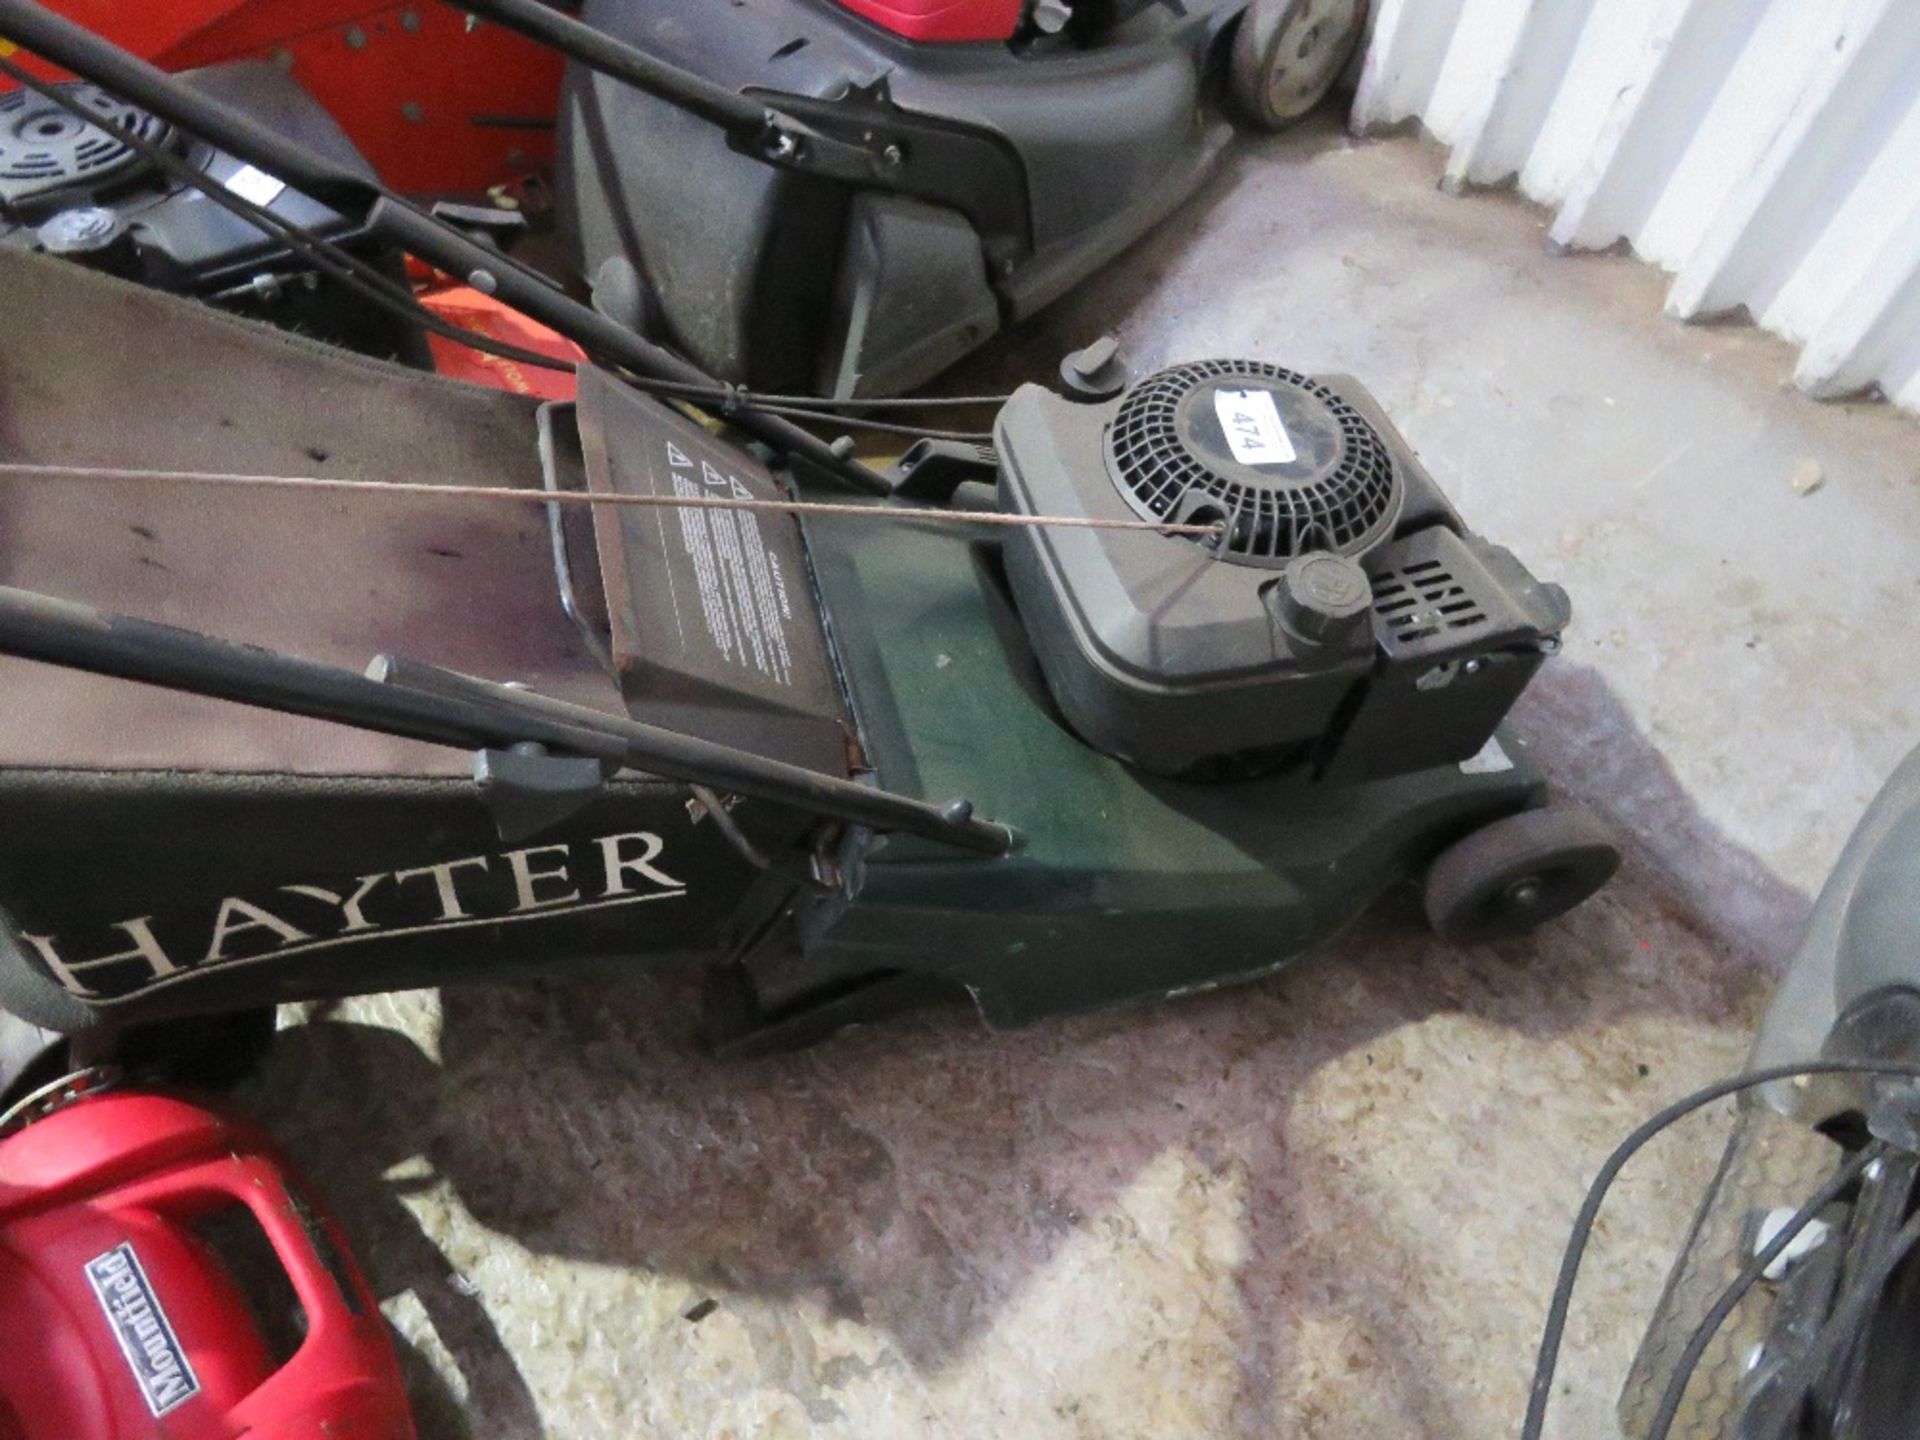 HAYTER PETROL ENGINED ROLLER LAWNMOWER WITH A COLLECTOR. THIS LOT IS SOLD UNDER THE AUCTIONEERS M - Image 3 of 3